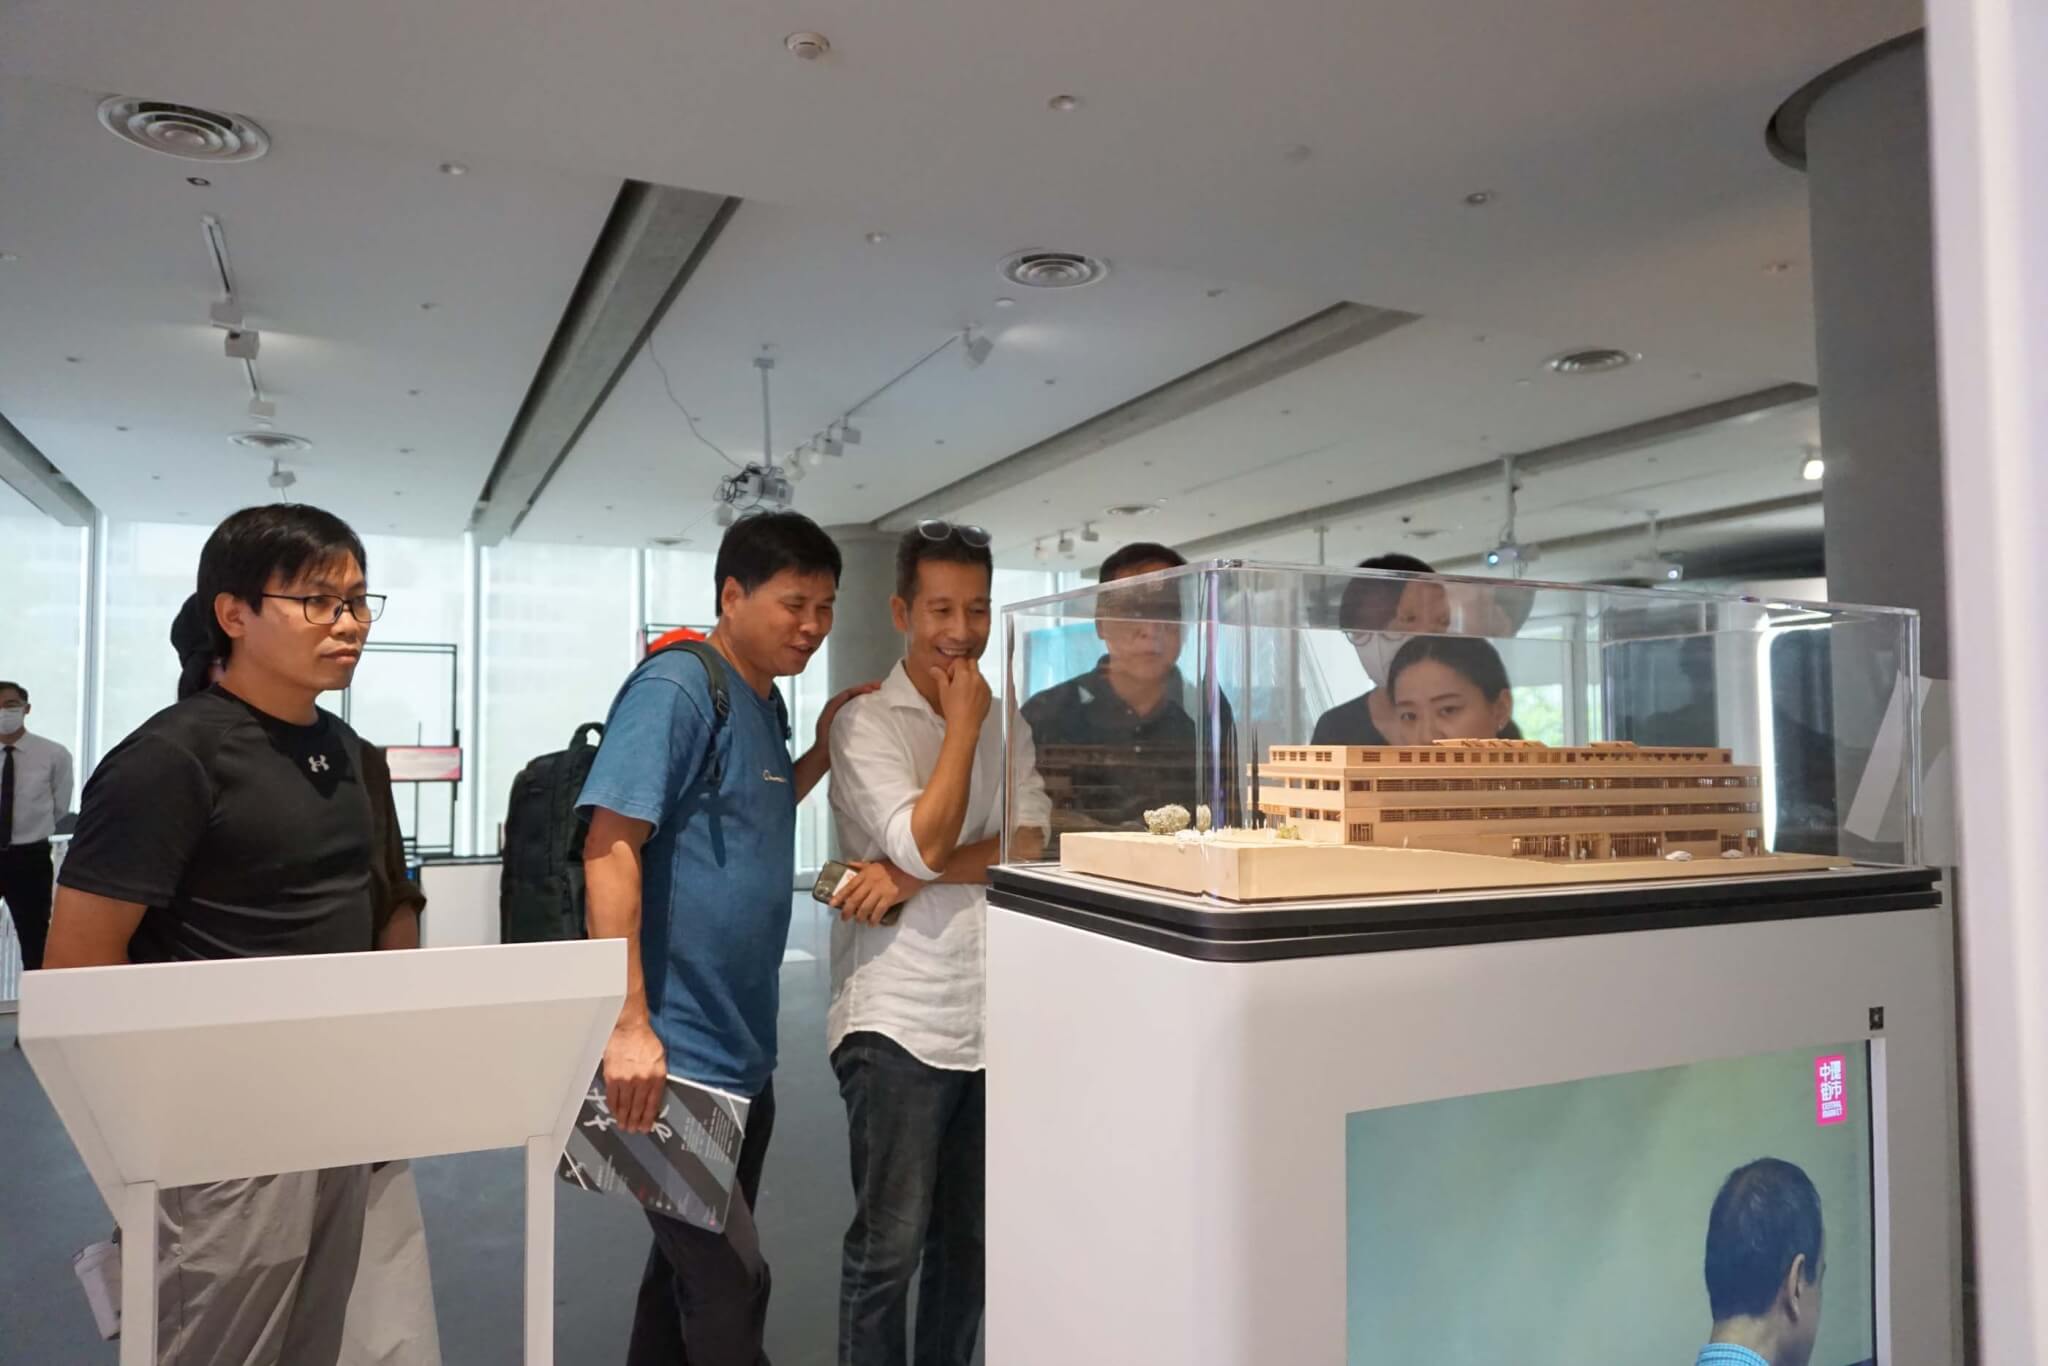 people looking at wooden model in glass display case